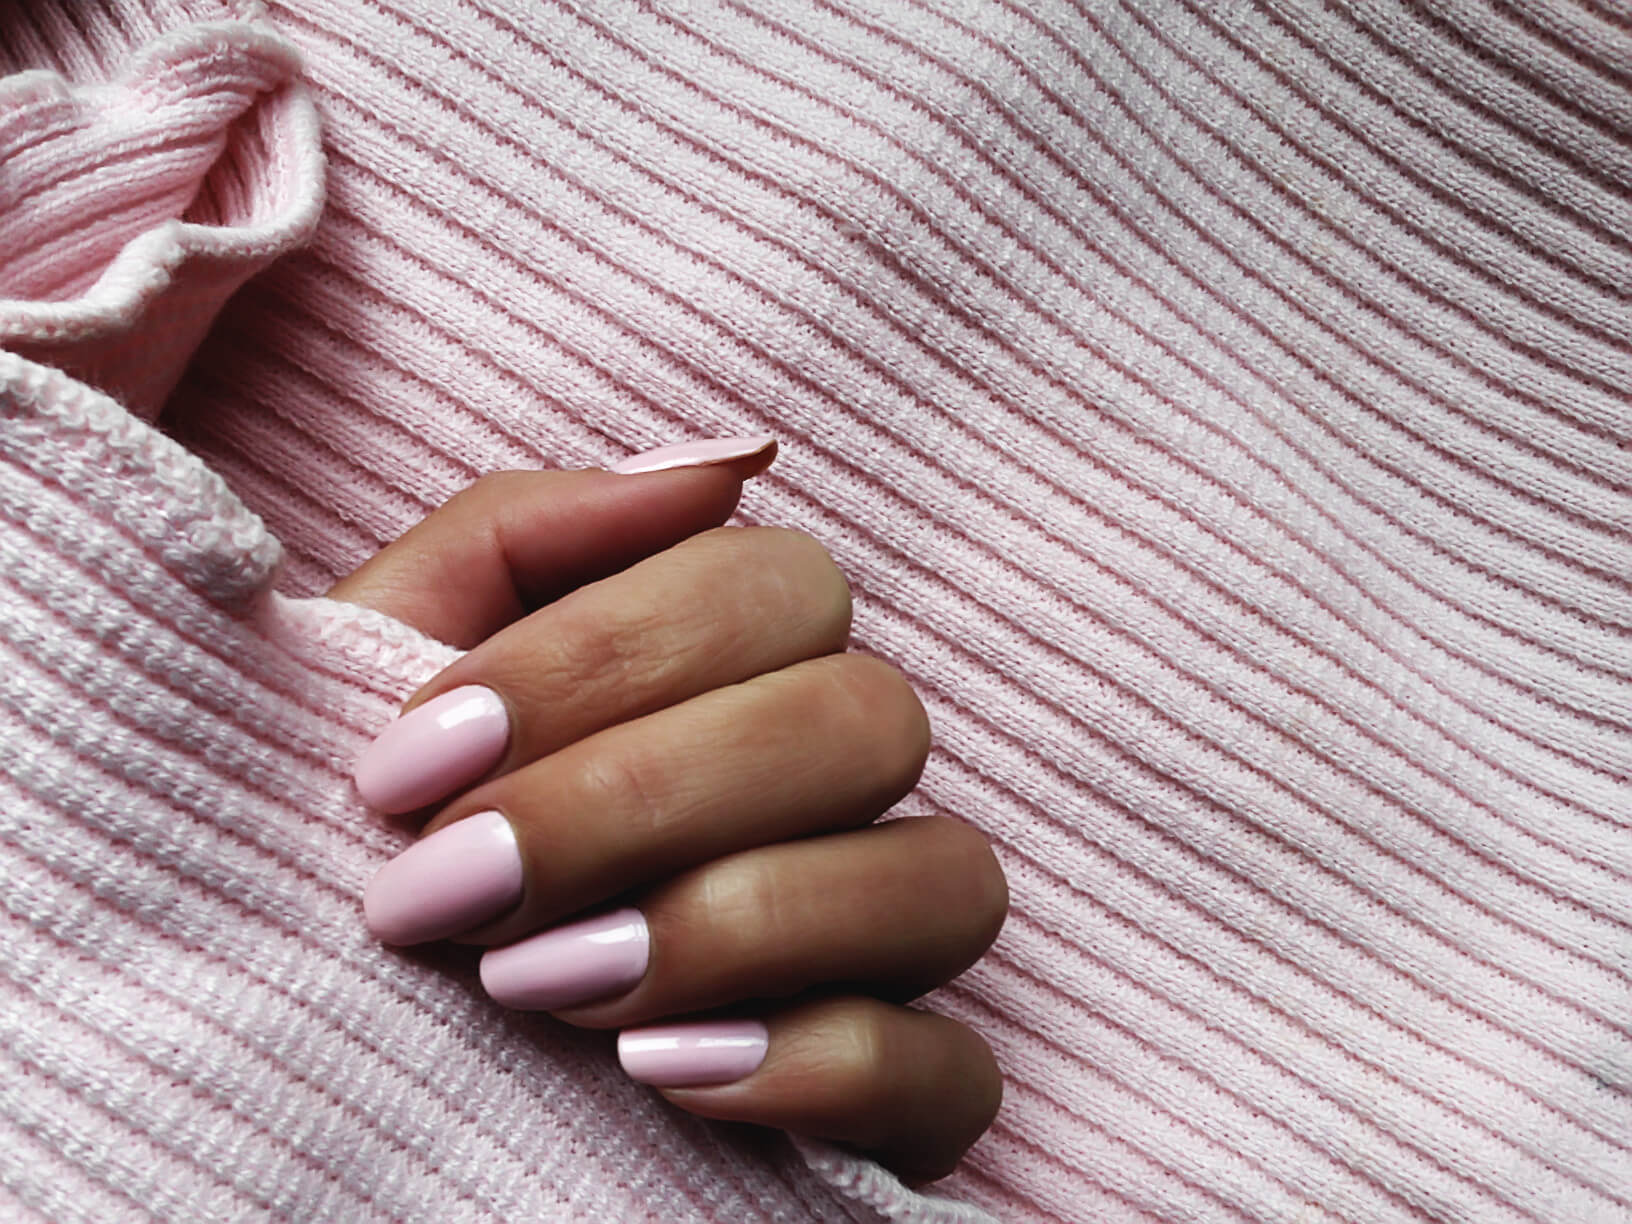 Are Gel Manicures Worth the Money?